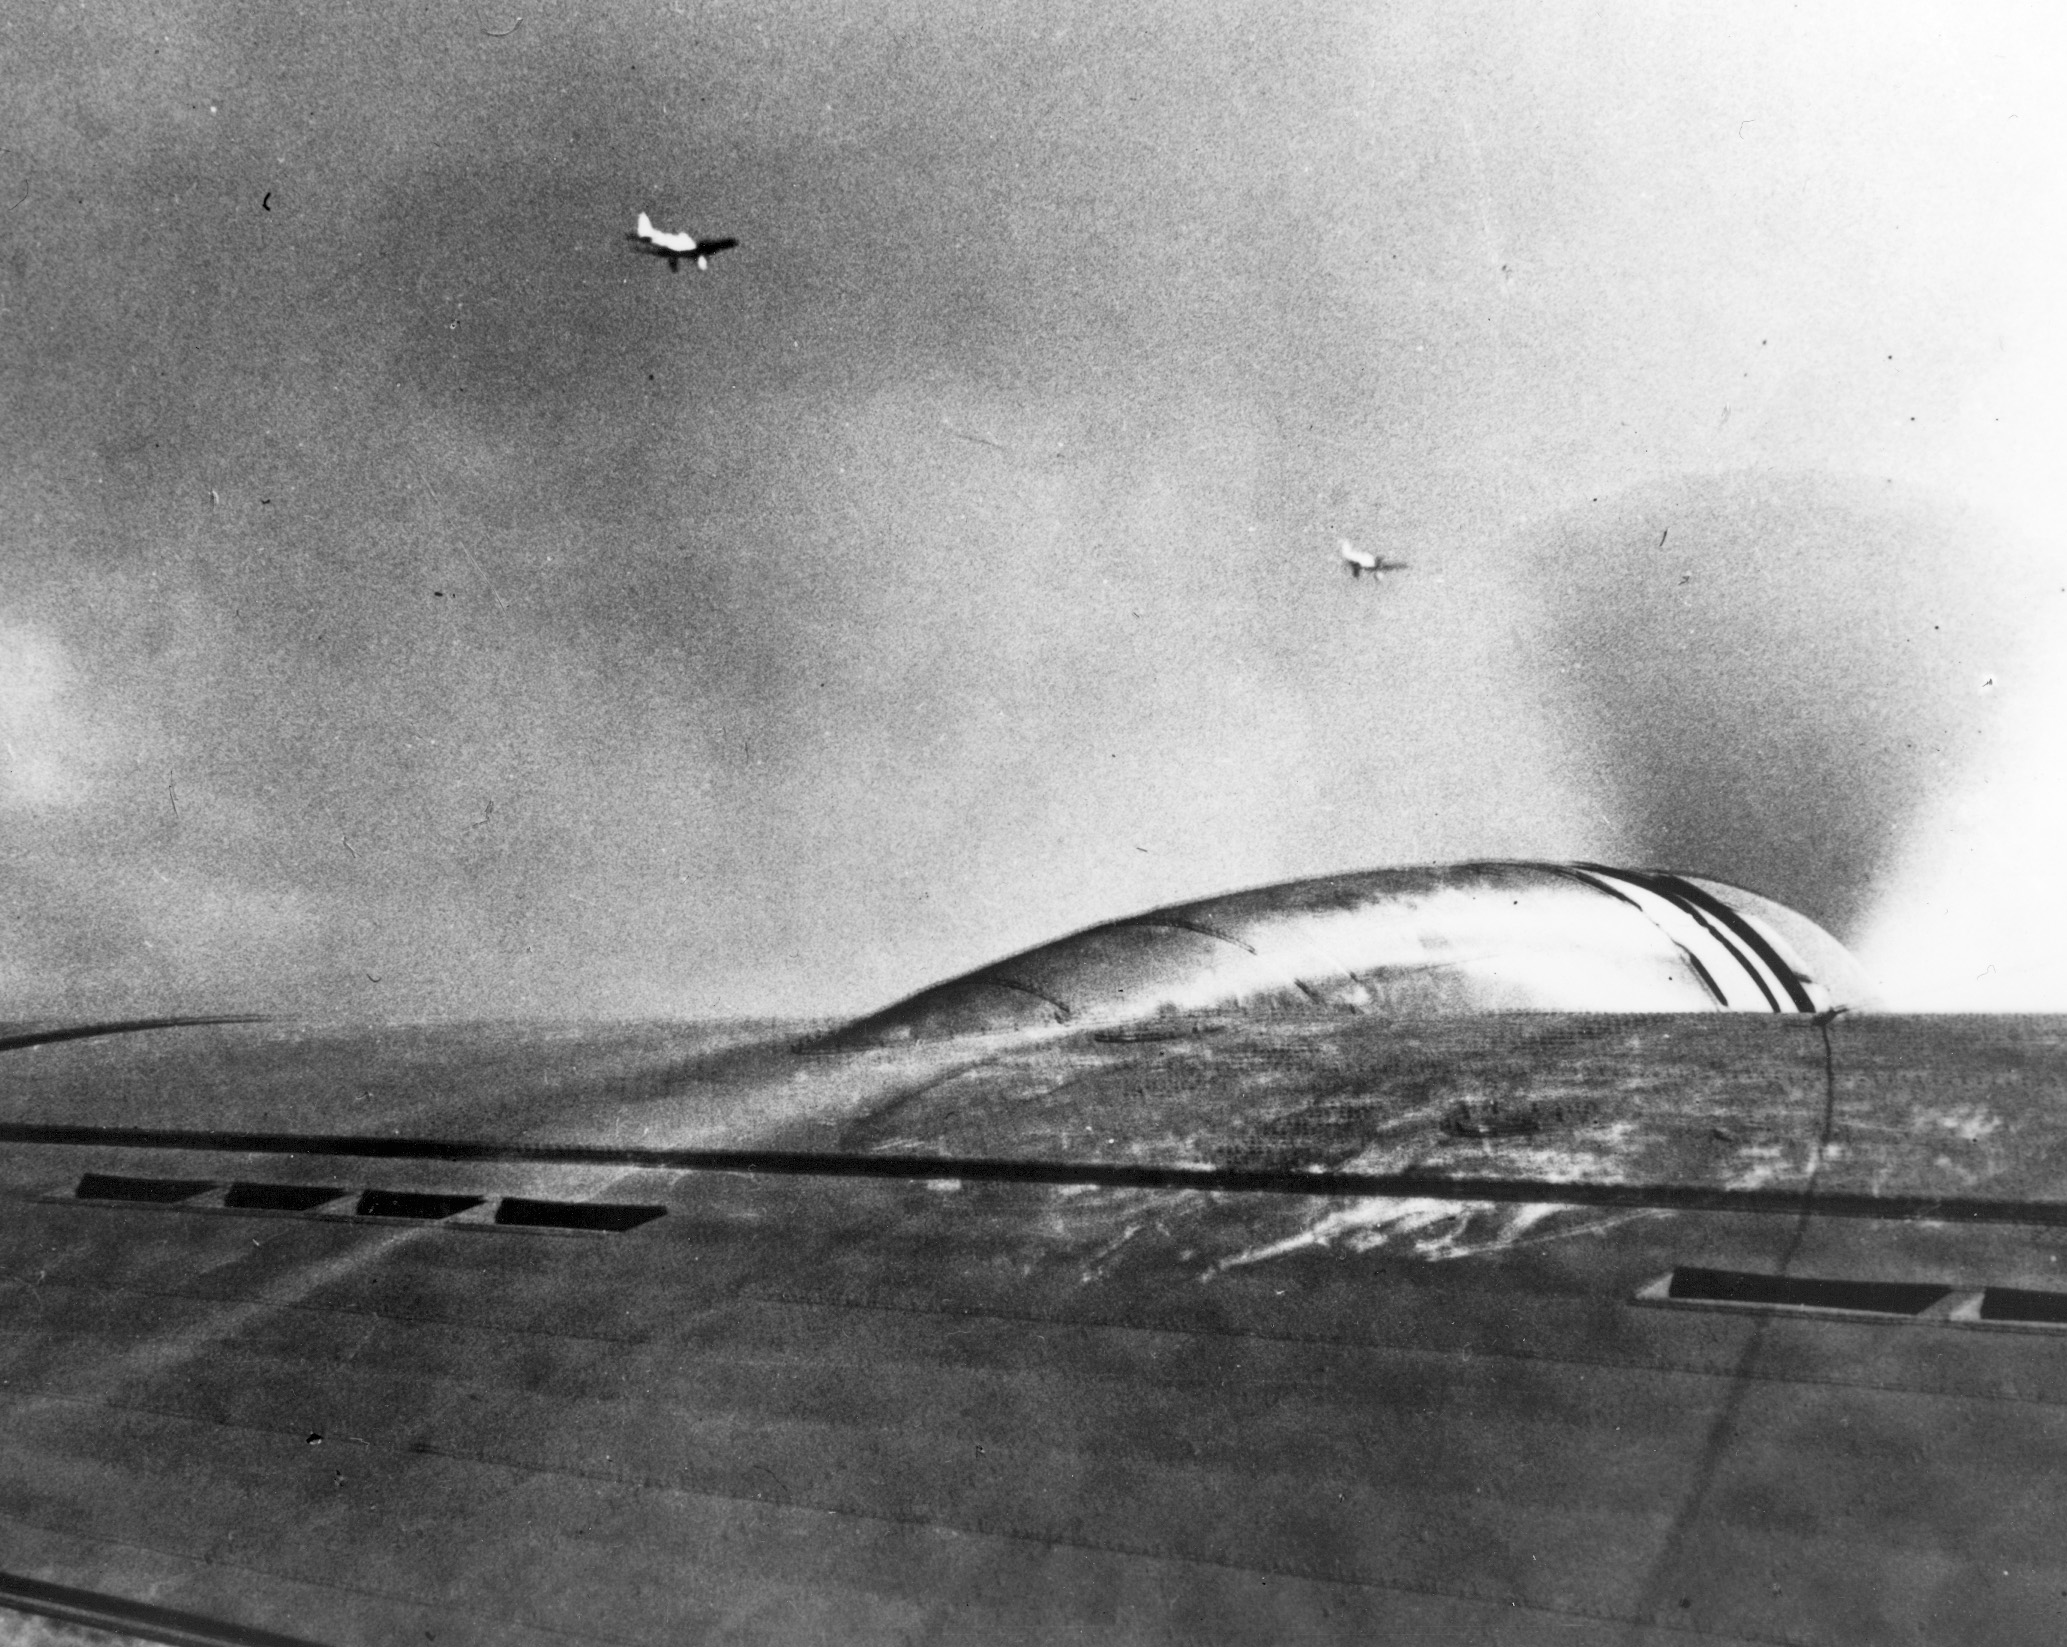 A pair of Aichi D3A Navy Type 99 dive-bombers was photographed from one of the B-17s arriving in Hawaii on the morning of December 7, 1941